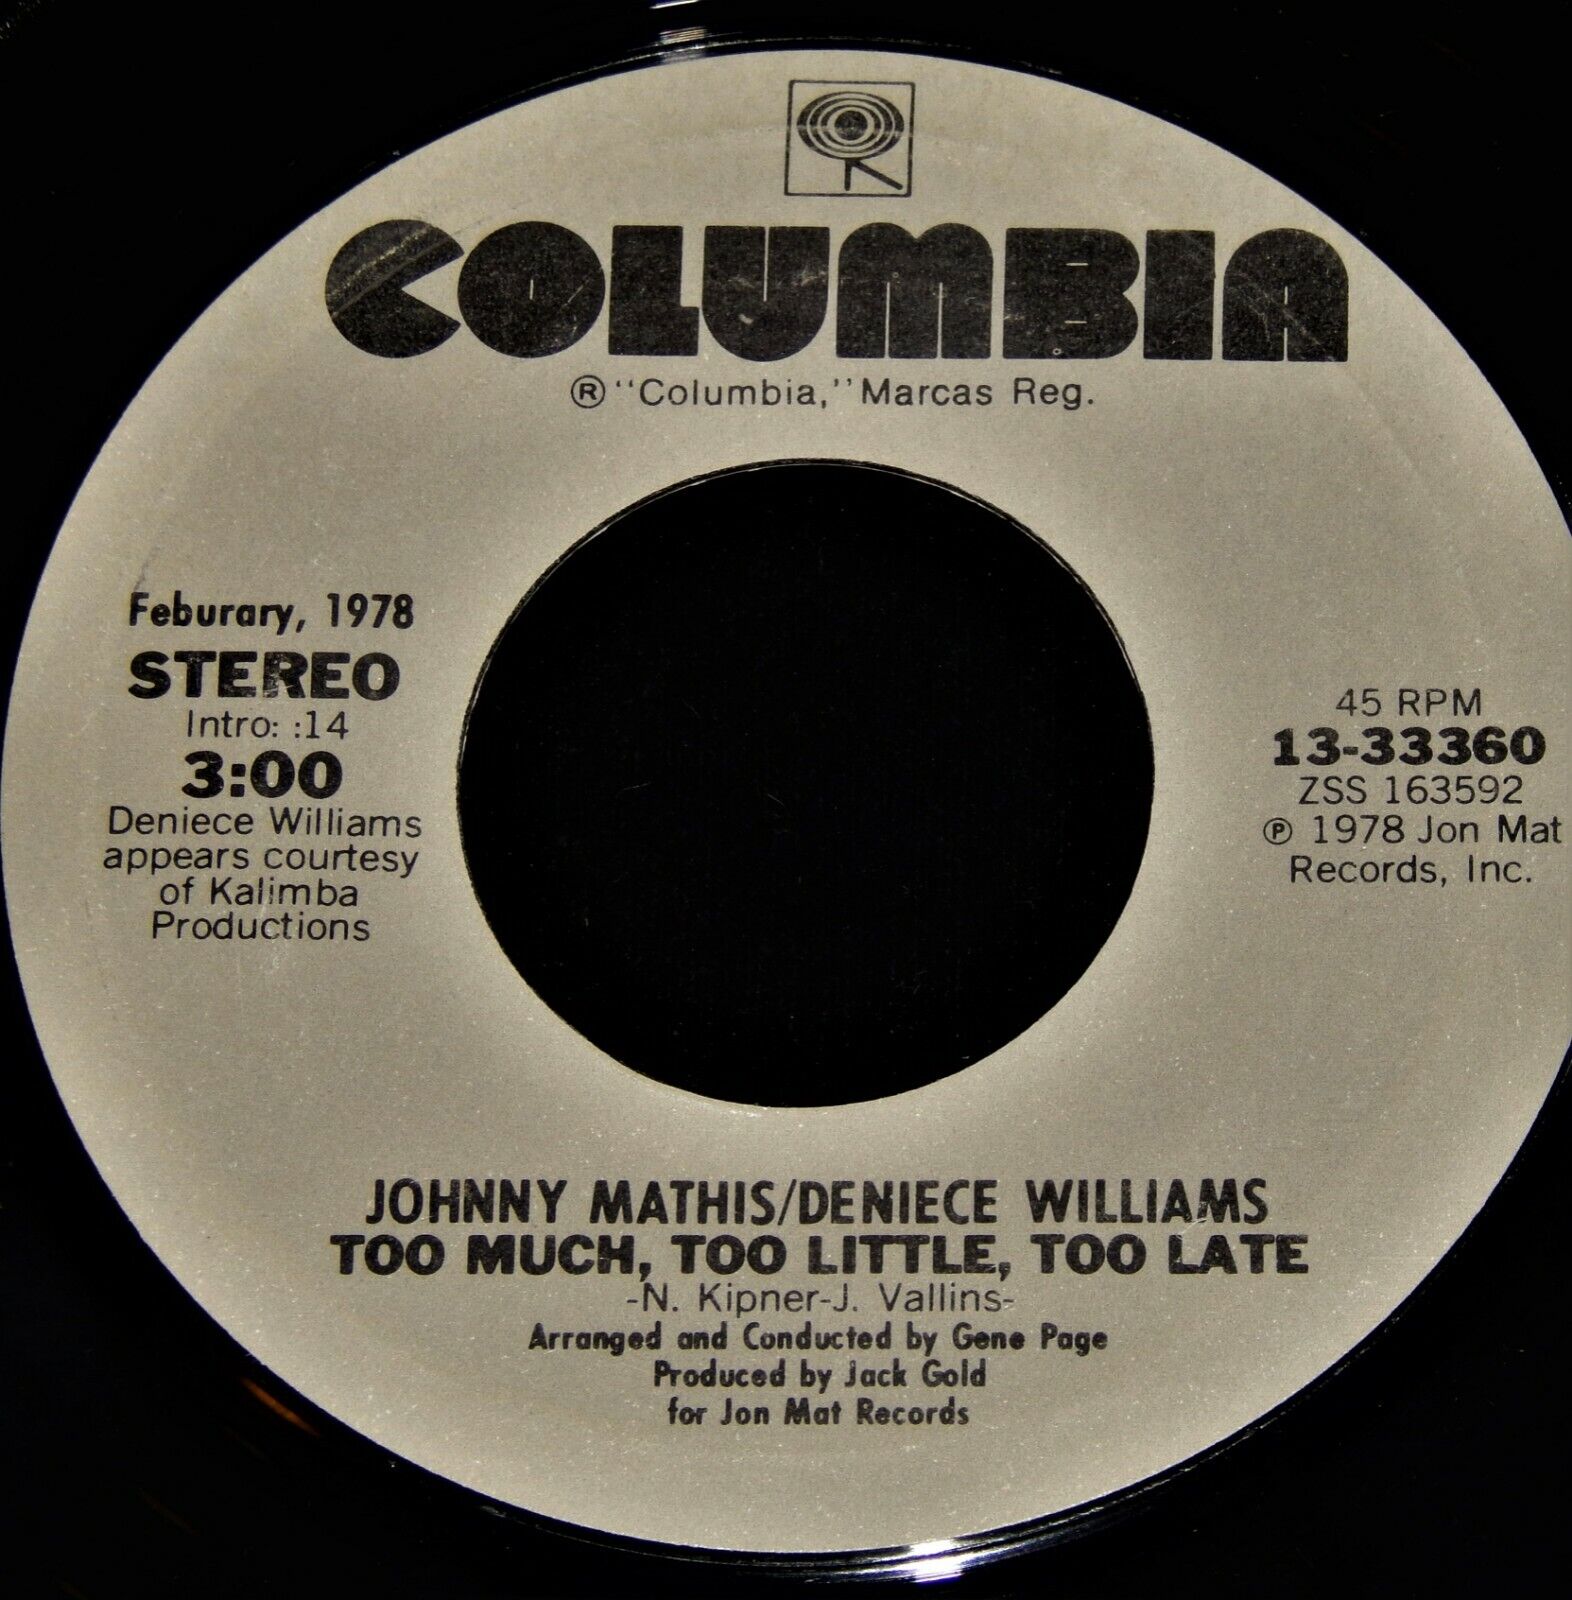 Vintage Record,JOHNNY MATHIS & DENIECE WILLIAMS: TOO MUCH TOO LITTLLE,45rpm,1978